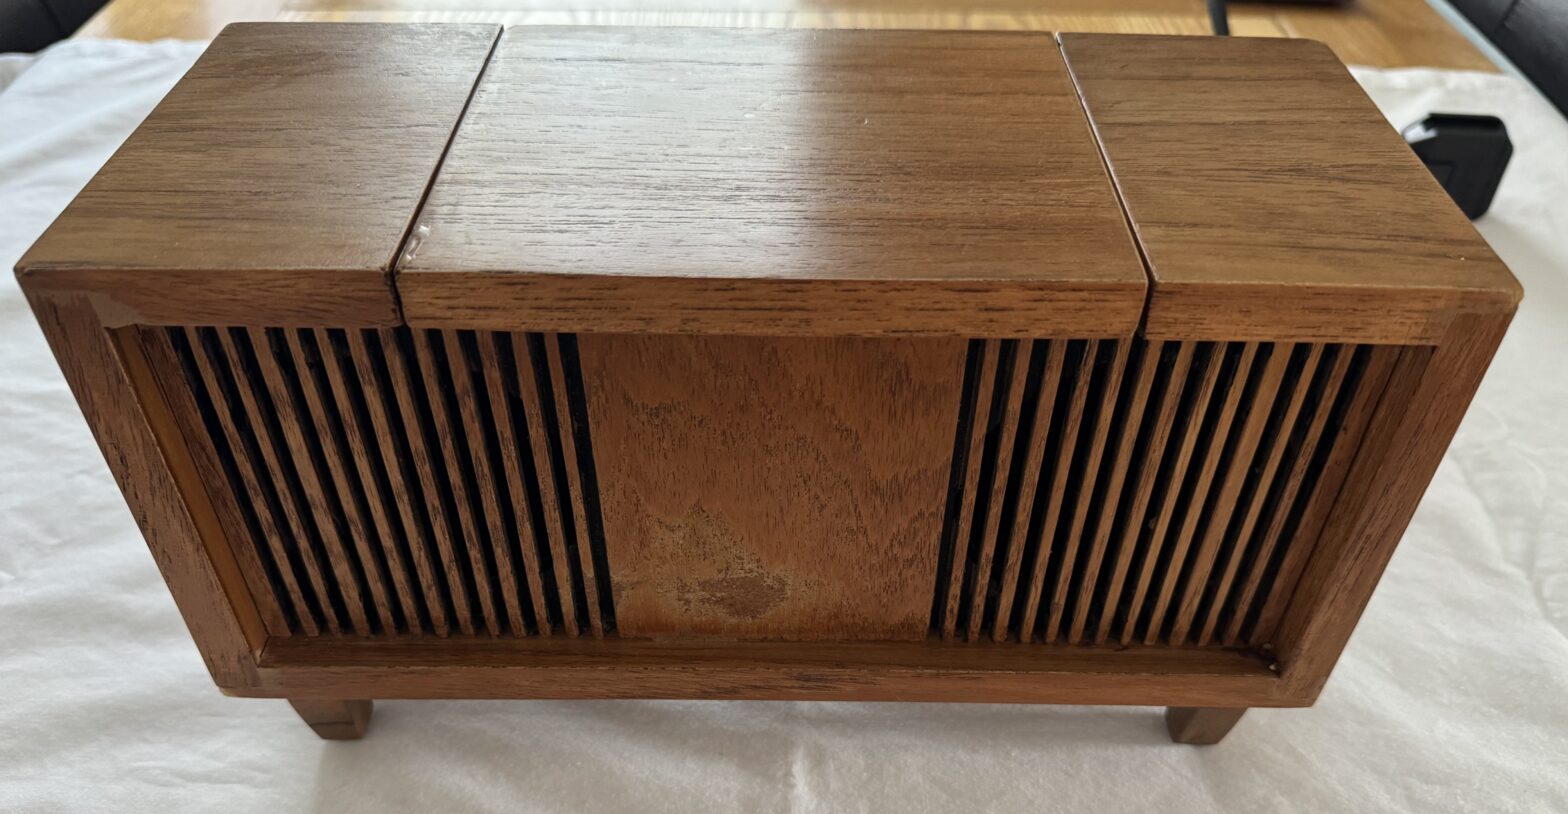 Radiogram Front View Finished